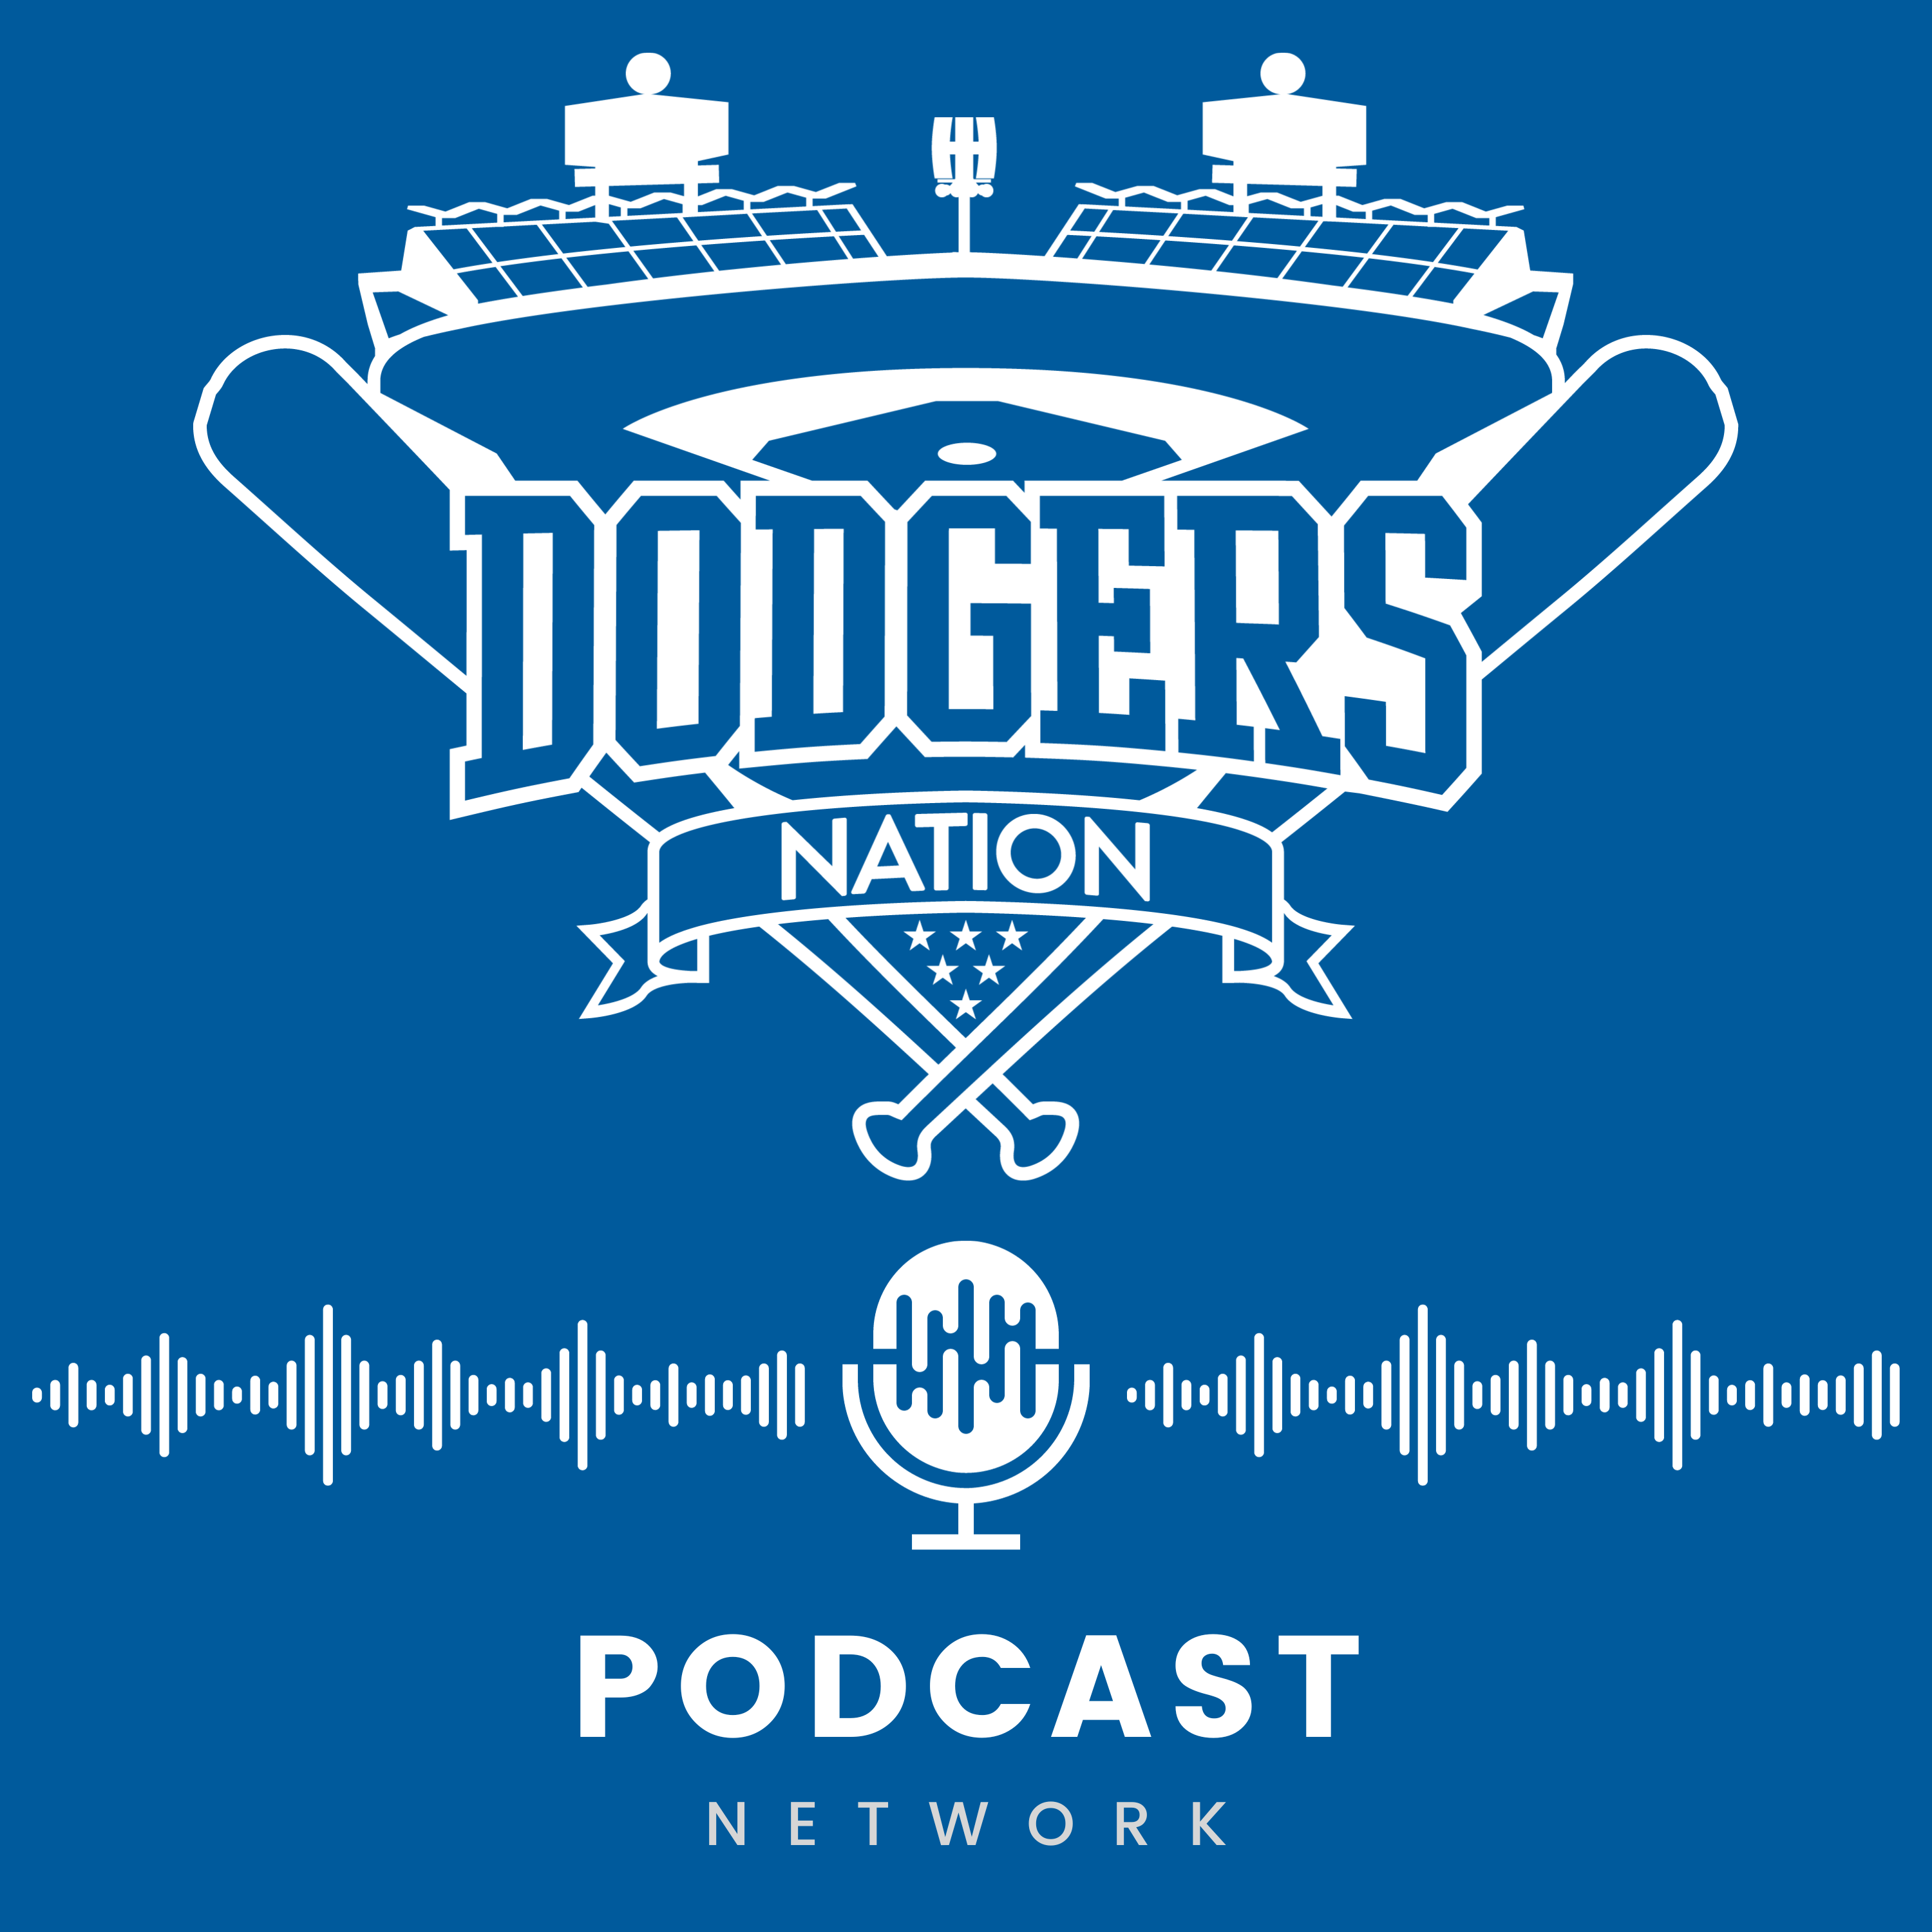 Dodgers podcast: Tommy Brown, the youngest player in franchise